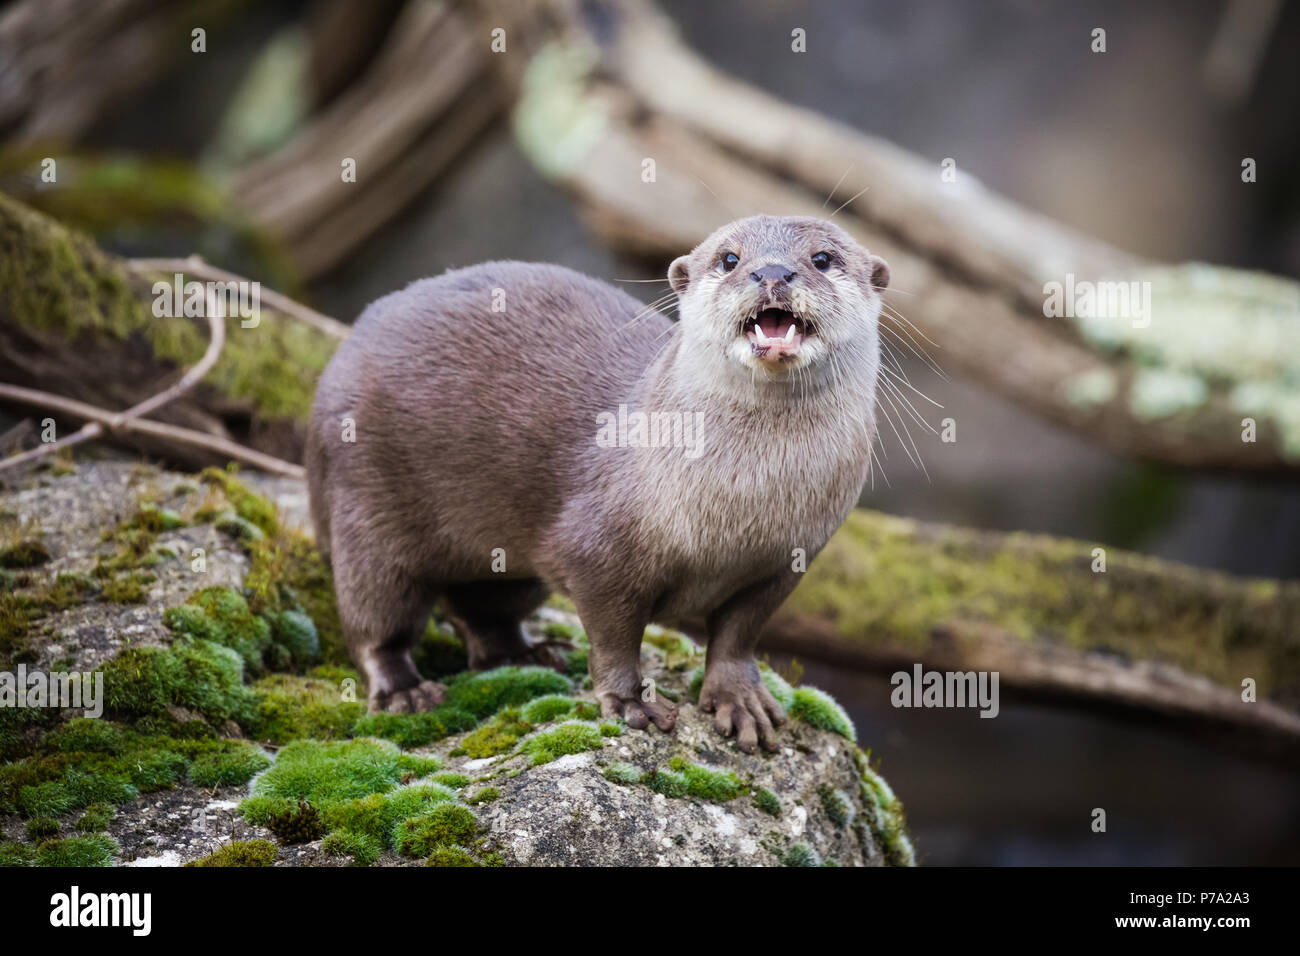 Oriental small-clawed otter standing on the riverbank. This is the smallest otter species in the world and is indigenous to the welands of South and S Stock Photo